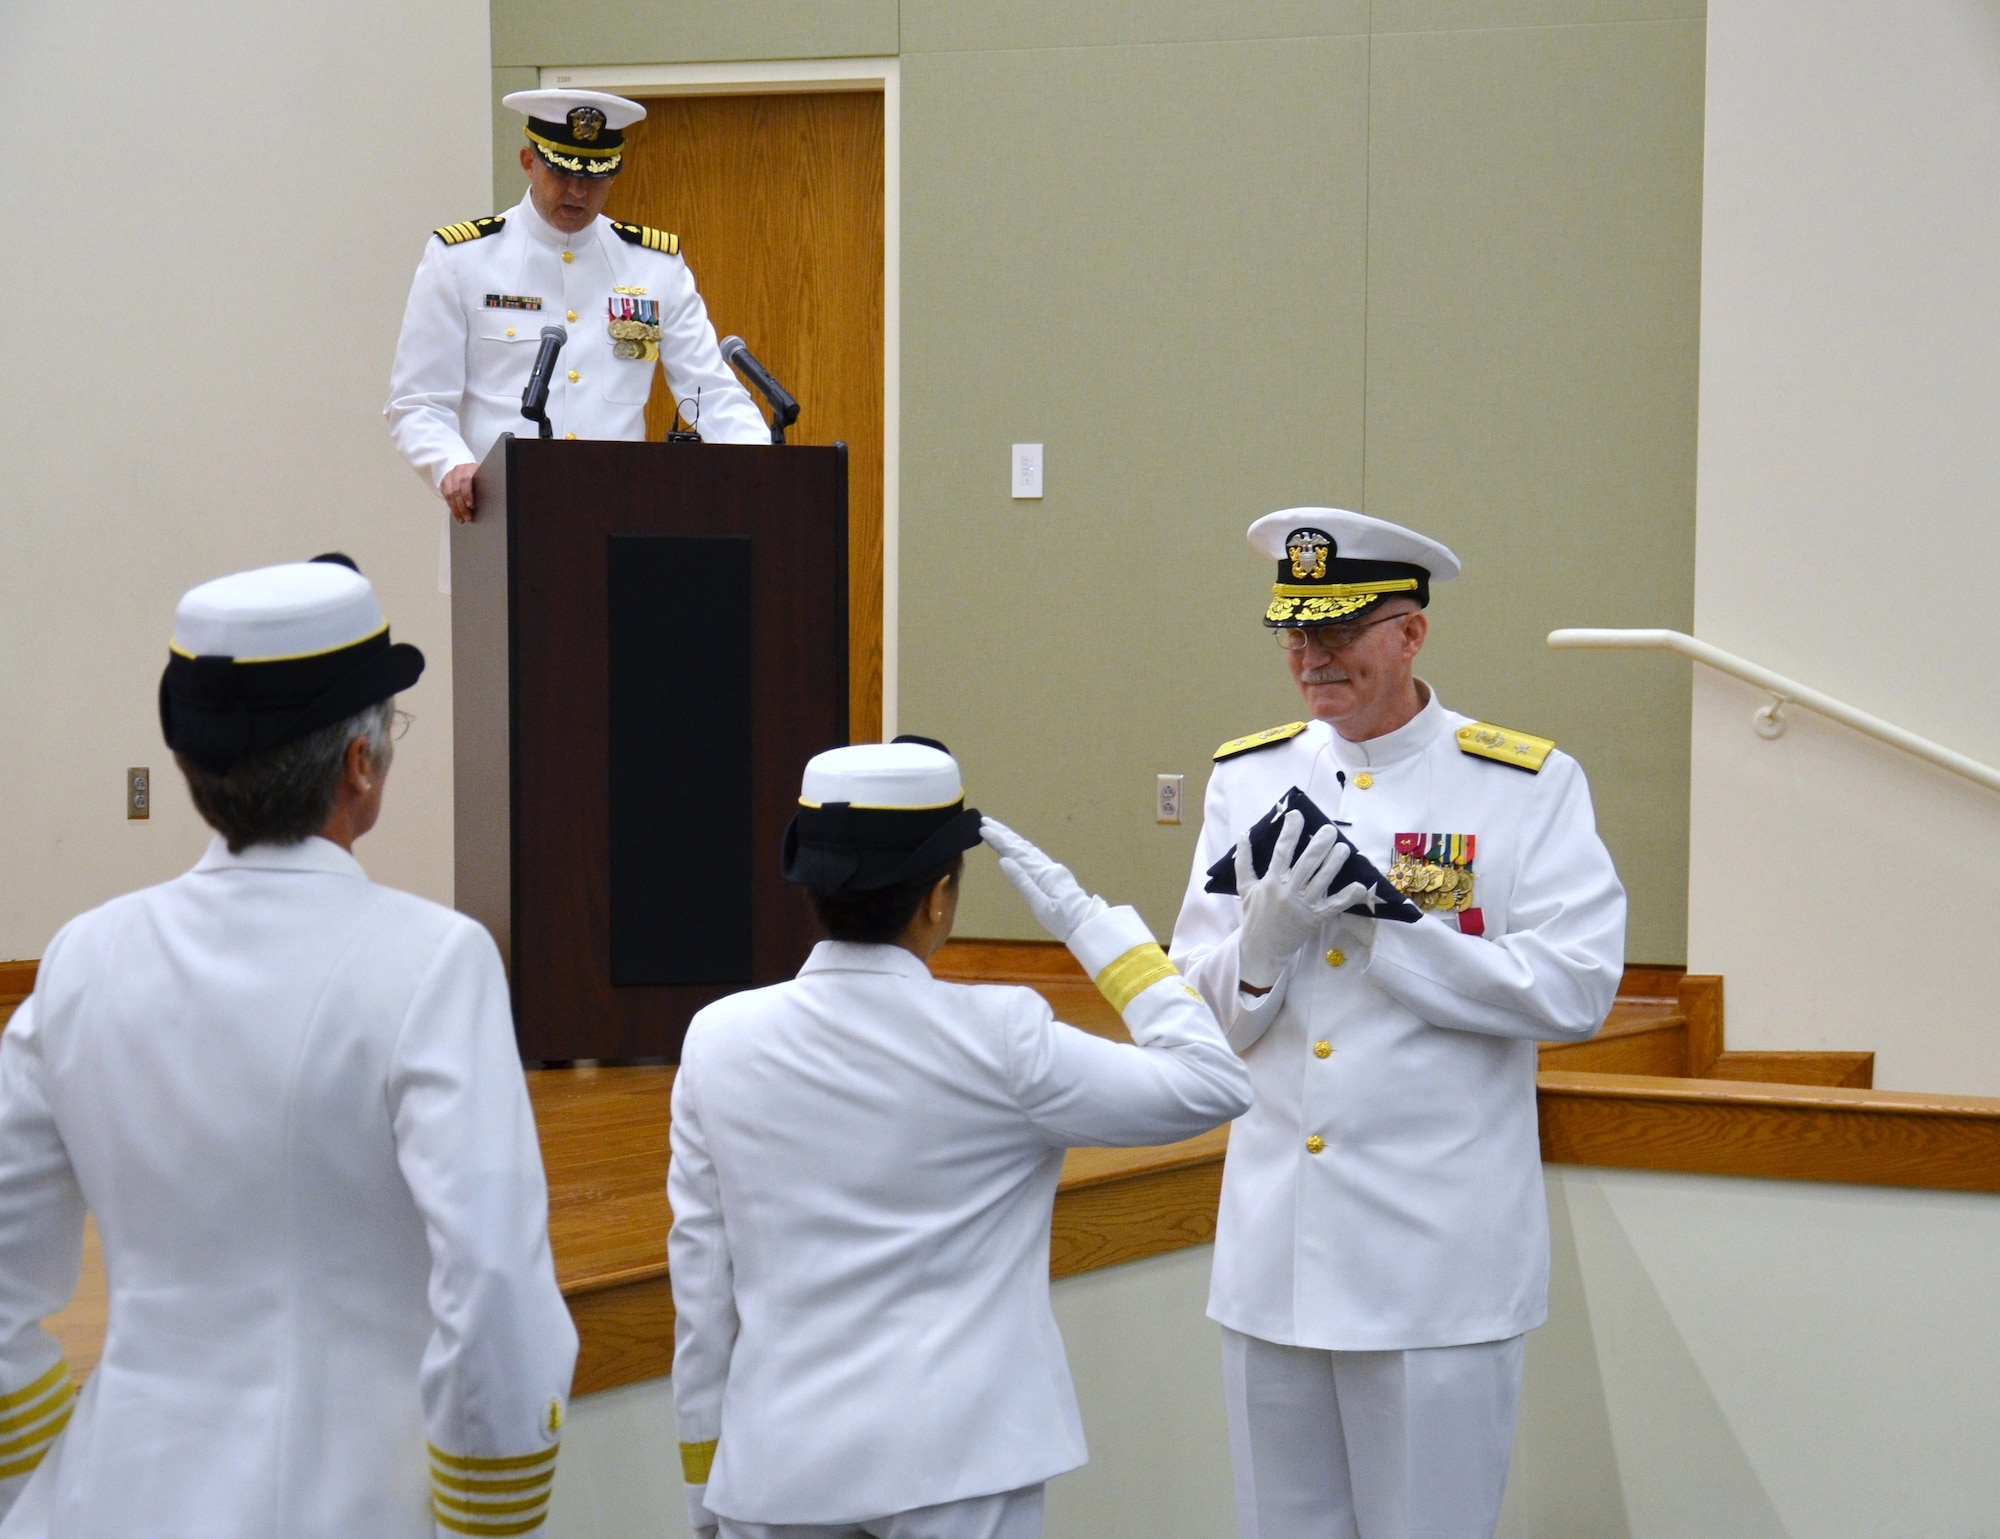 Joint Base San Antonio-Fort Sam Houston, Texas,  Rear Adm. Eleanor Valentin, Commander, Navy Medicine Support Command and Director, Navy Medical Service Corps renders a salute after presenting the flag to Rear Adm. Bob Kiser during his retirement ceremony June 15. Kiser, the first commandant of the Medical Education and Training Campus, retired after 38 years of combined reserve and active duty service. (U.S. Navy photo by Lisa Braun/released)